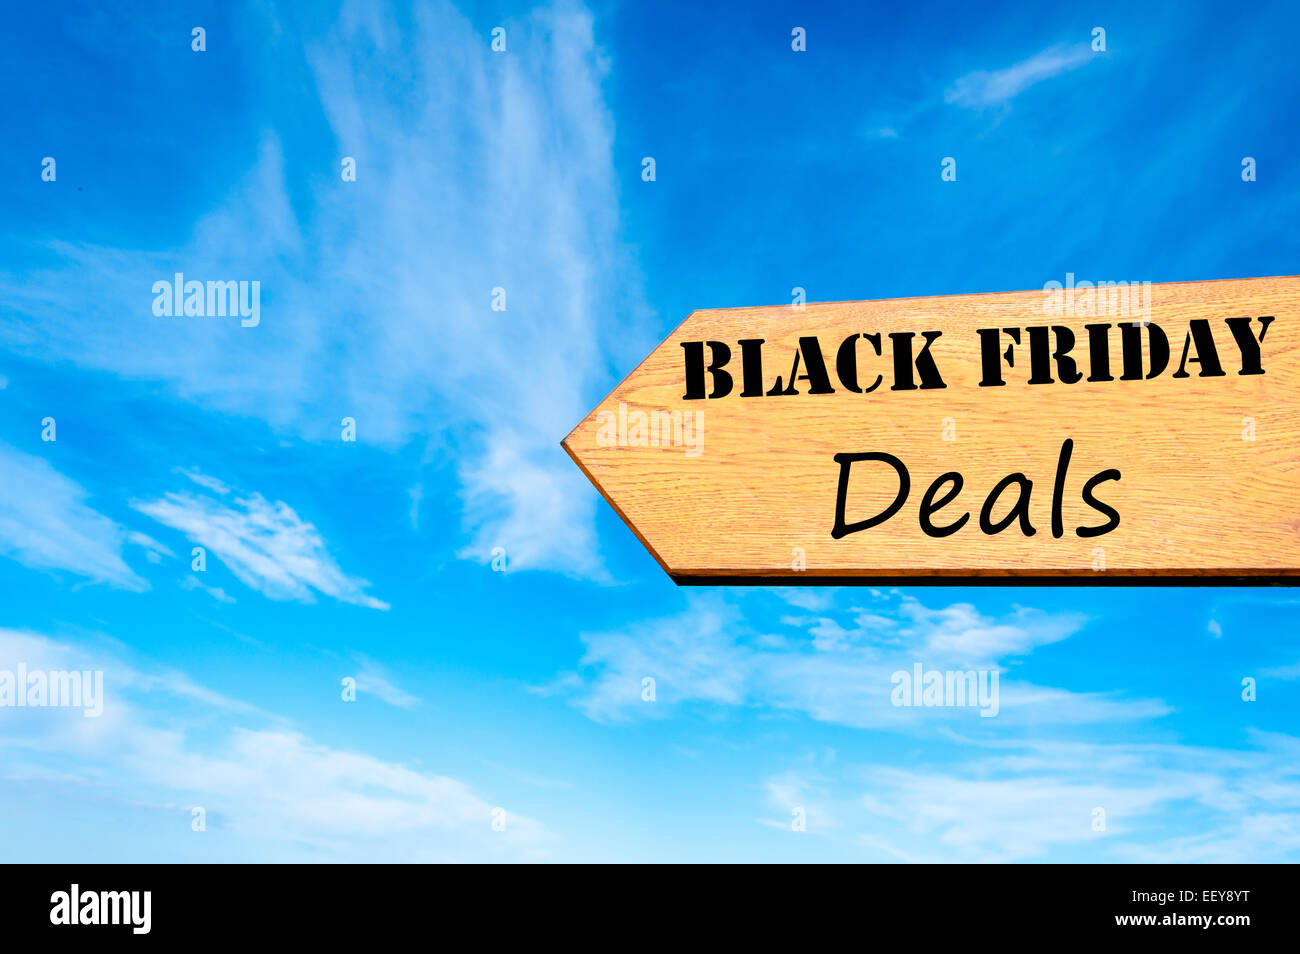 Wood arrow sign against clear blue sky with Black Friday Deals message, Sales conceptual image Stock Photo